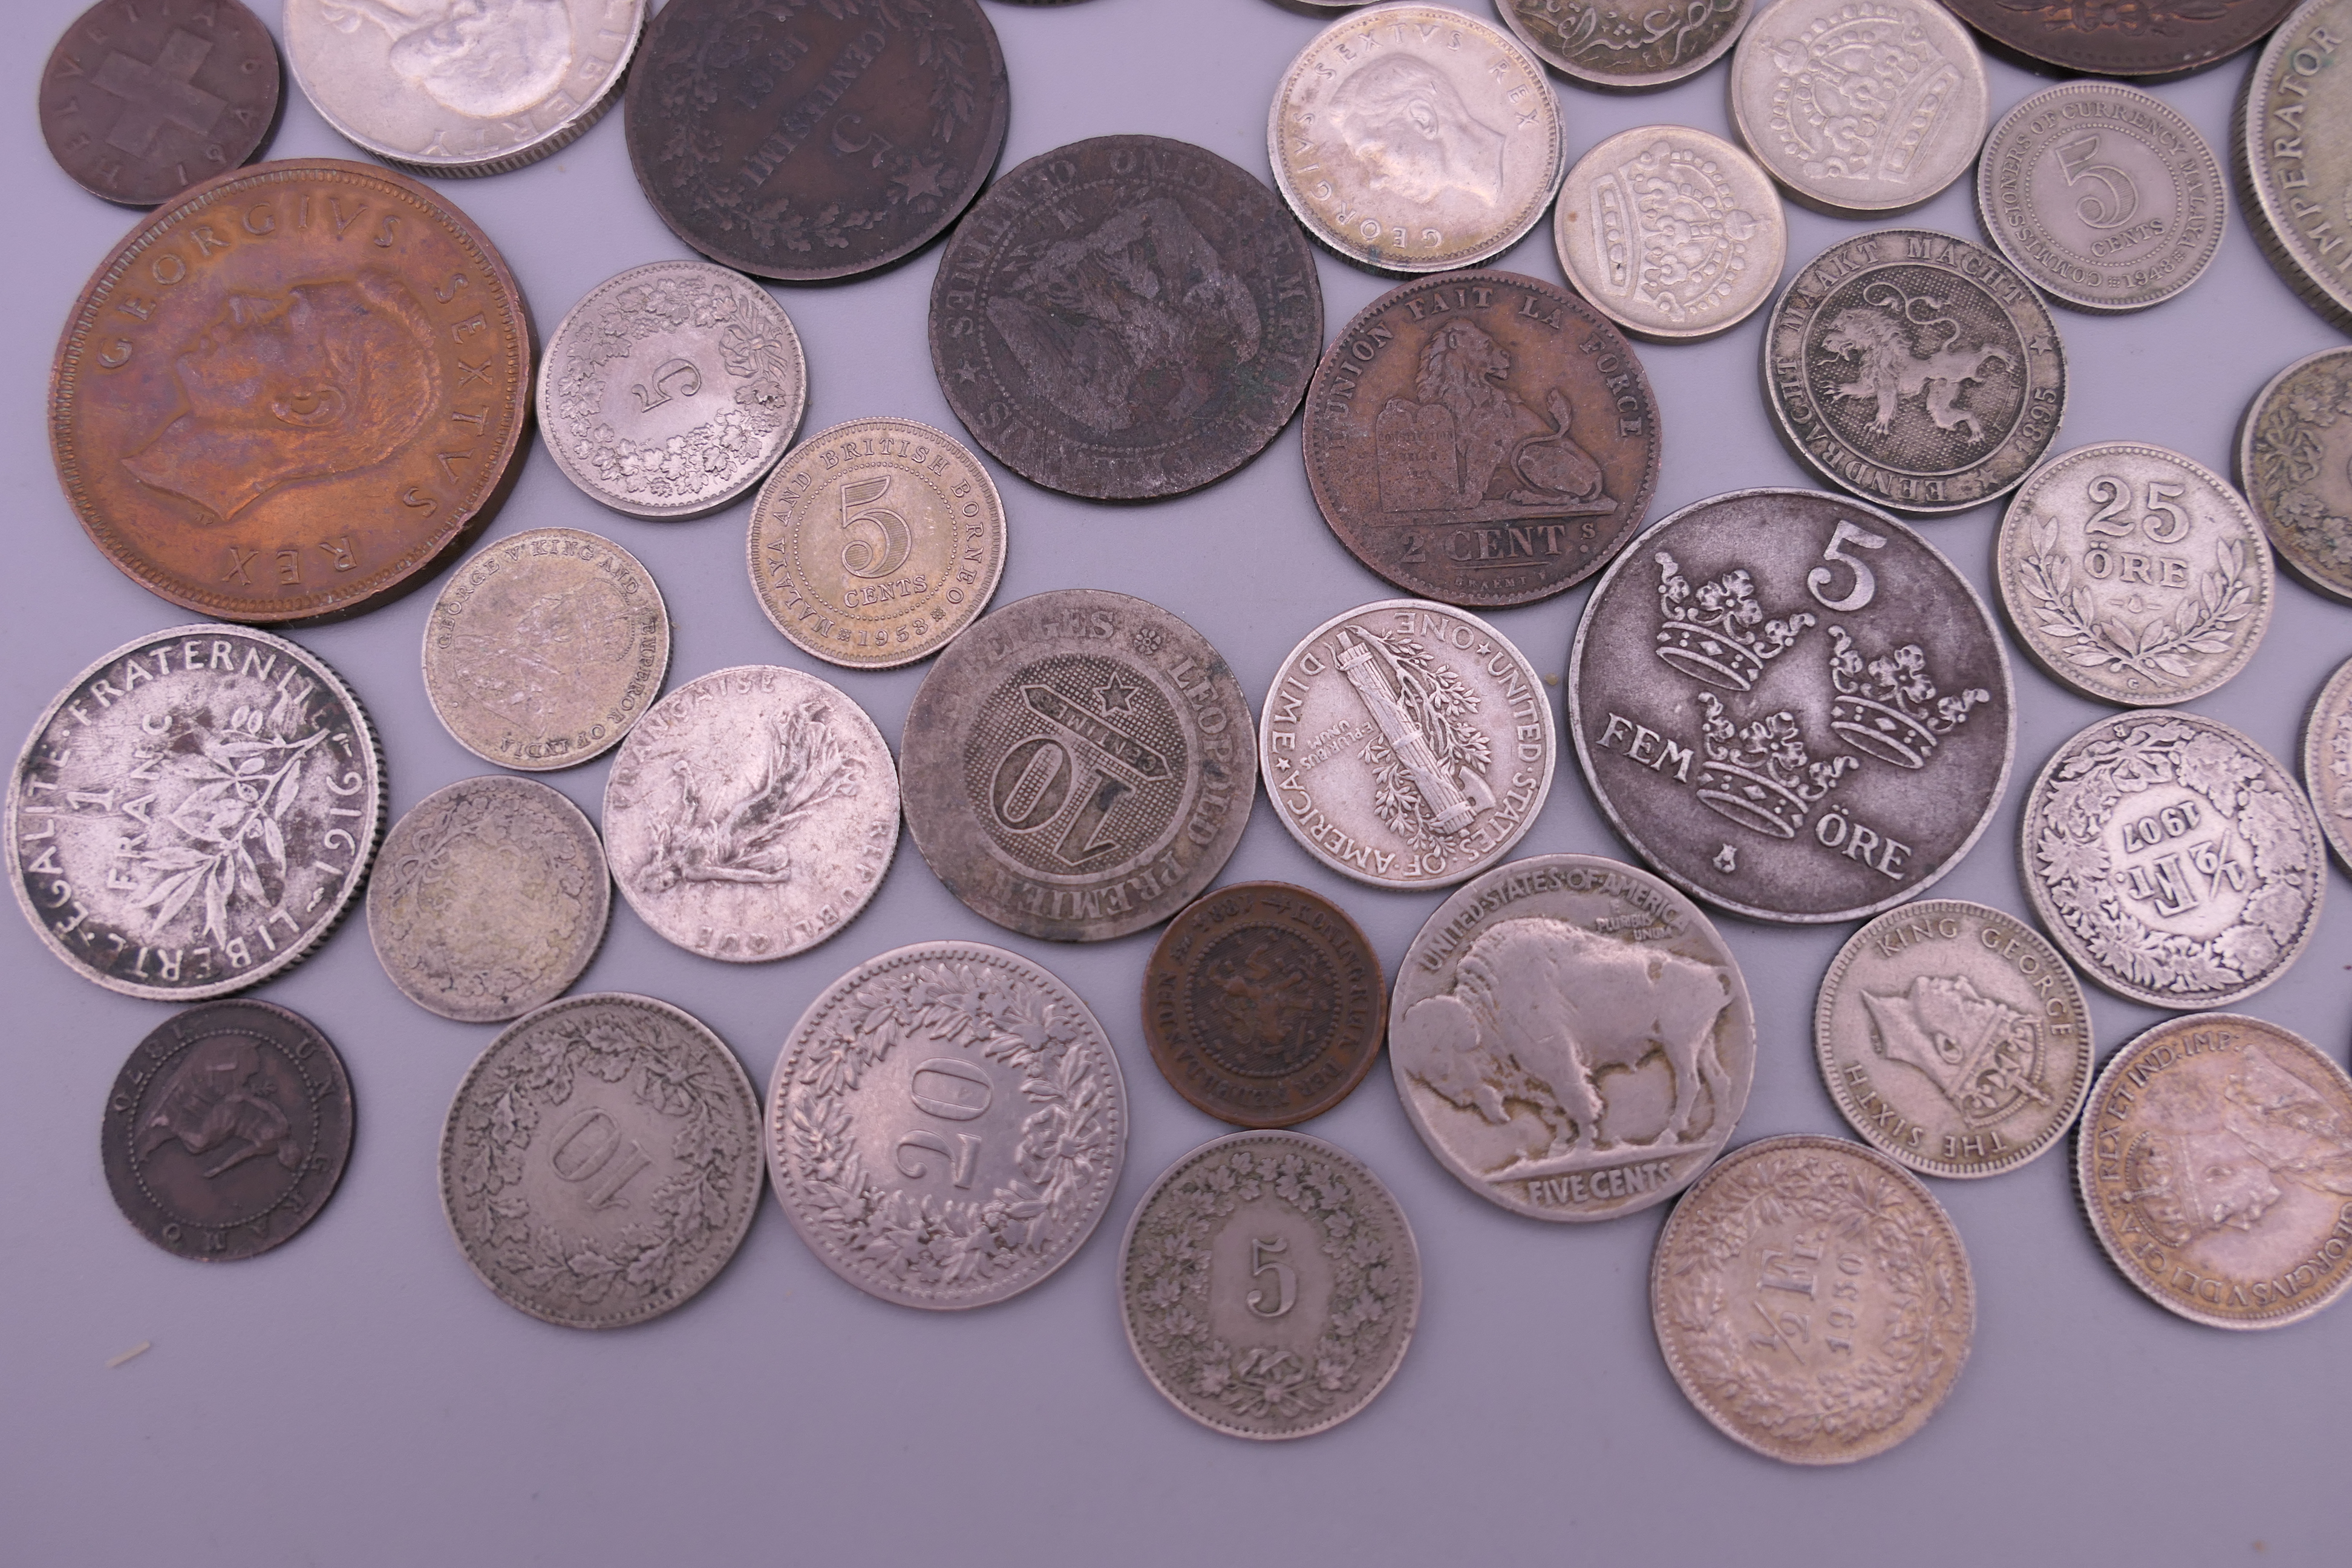 A bag of coins, including silver. - Image 2 of 8